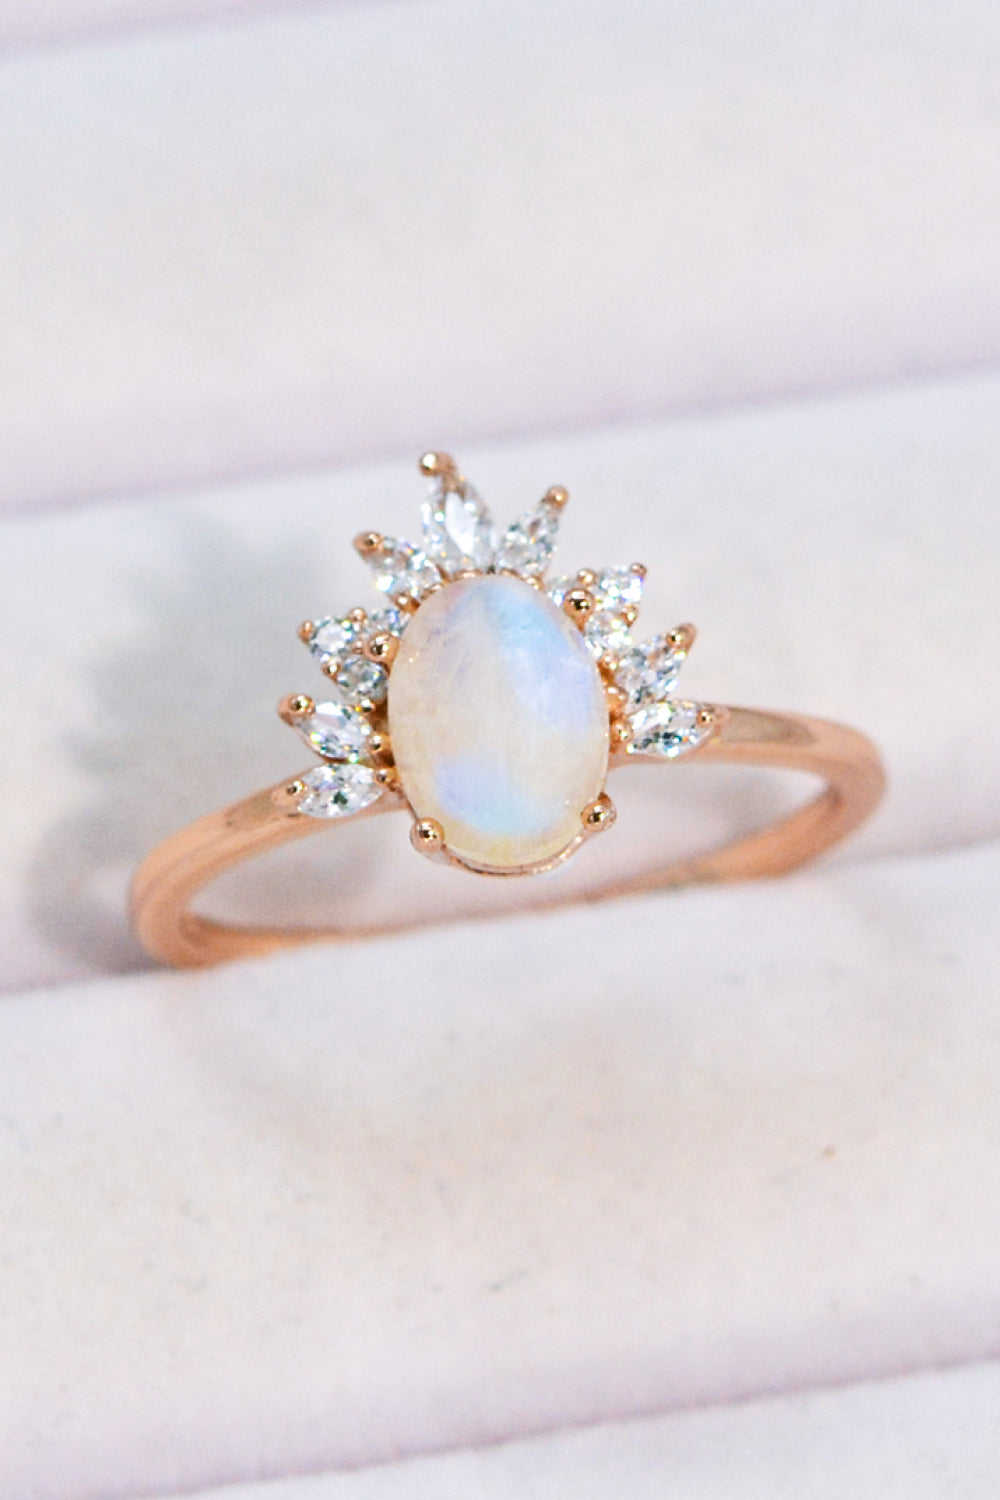 Discover the enchantment of moonstone rings with our Aura Natural Moonstone Ring collection. Embrace the ethereal beauty of these rings.